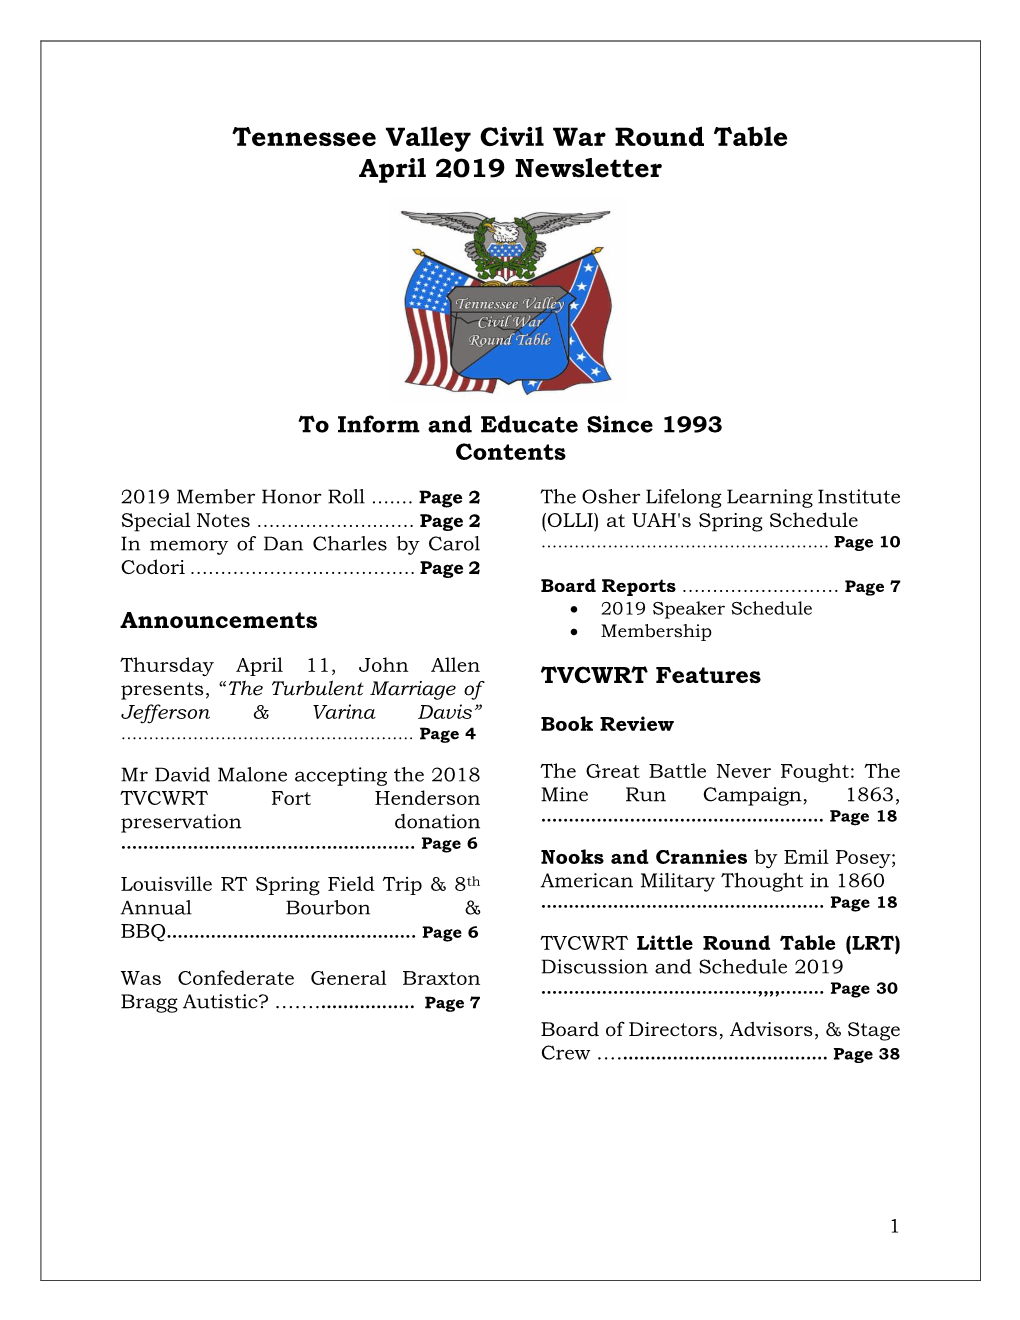 Tennessee Valley Civil War Round Table April 2019 Newsletter